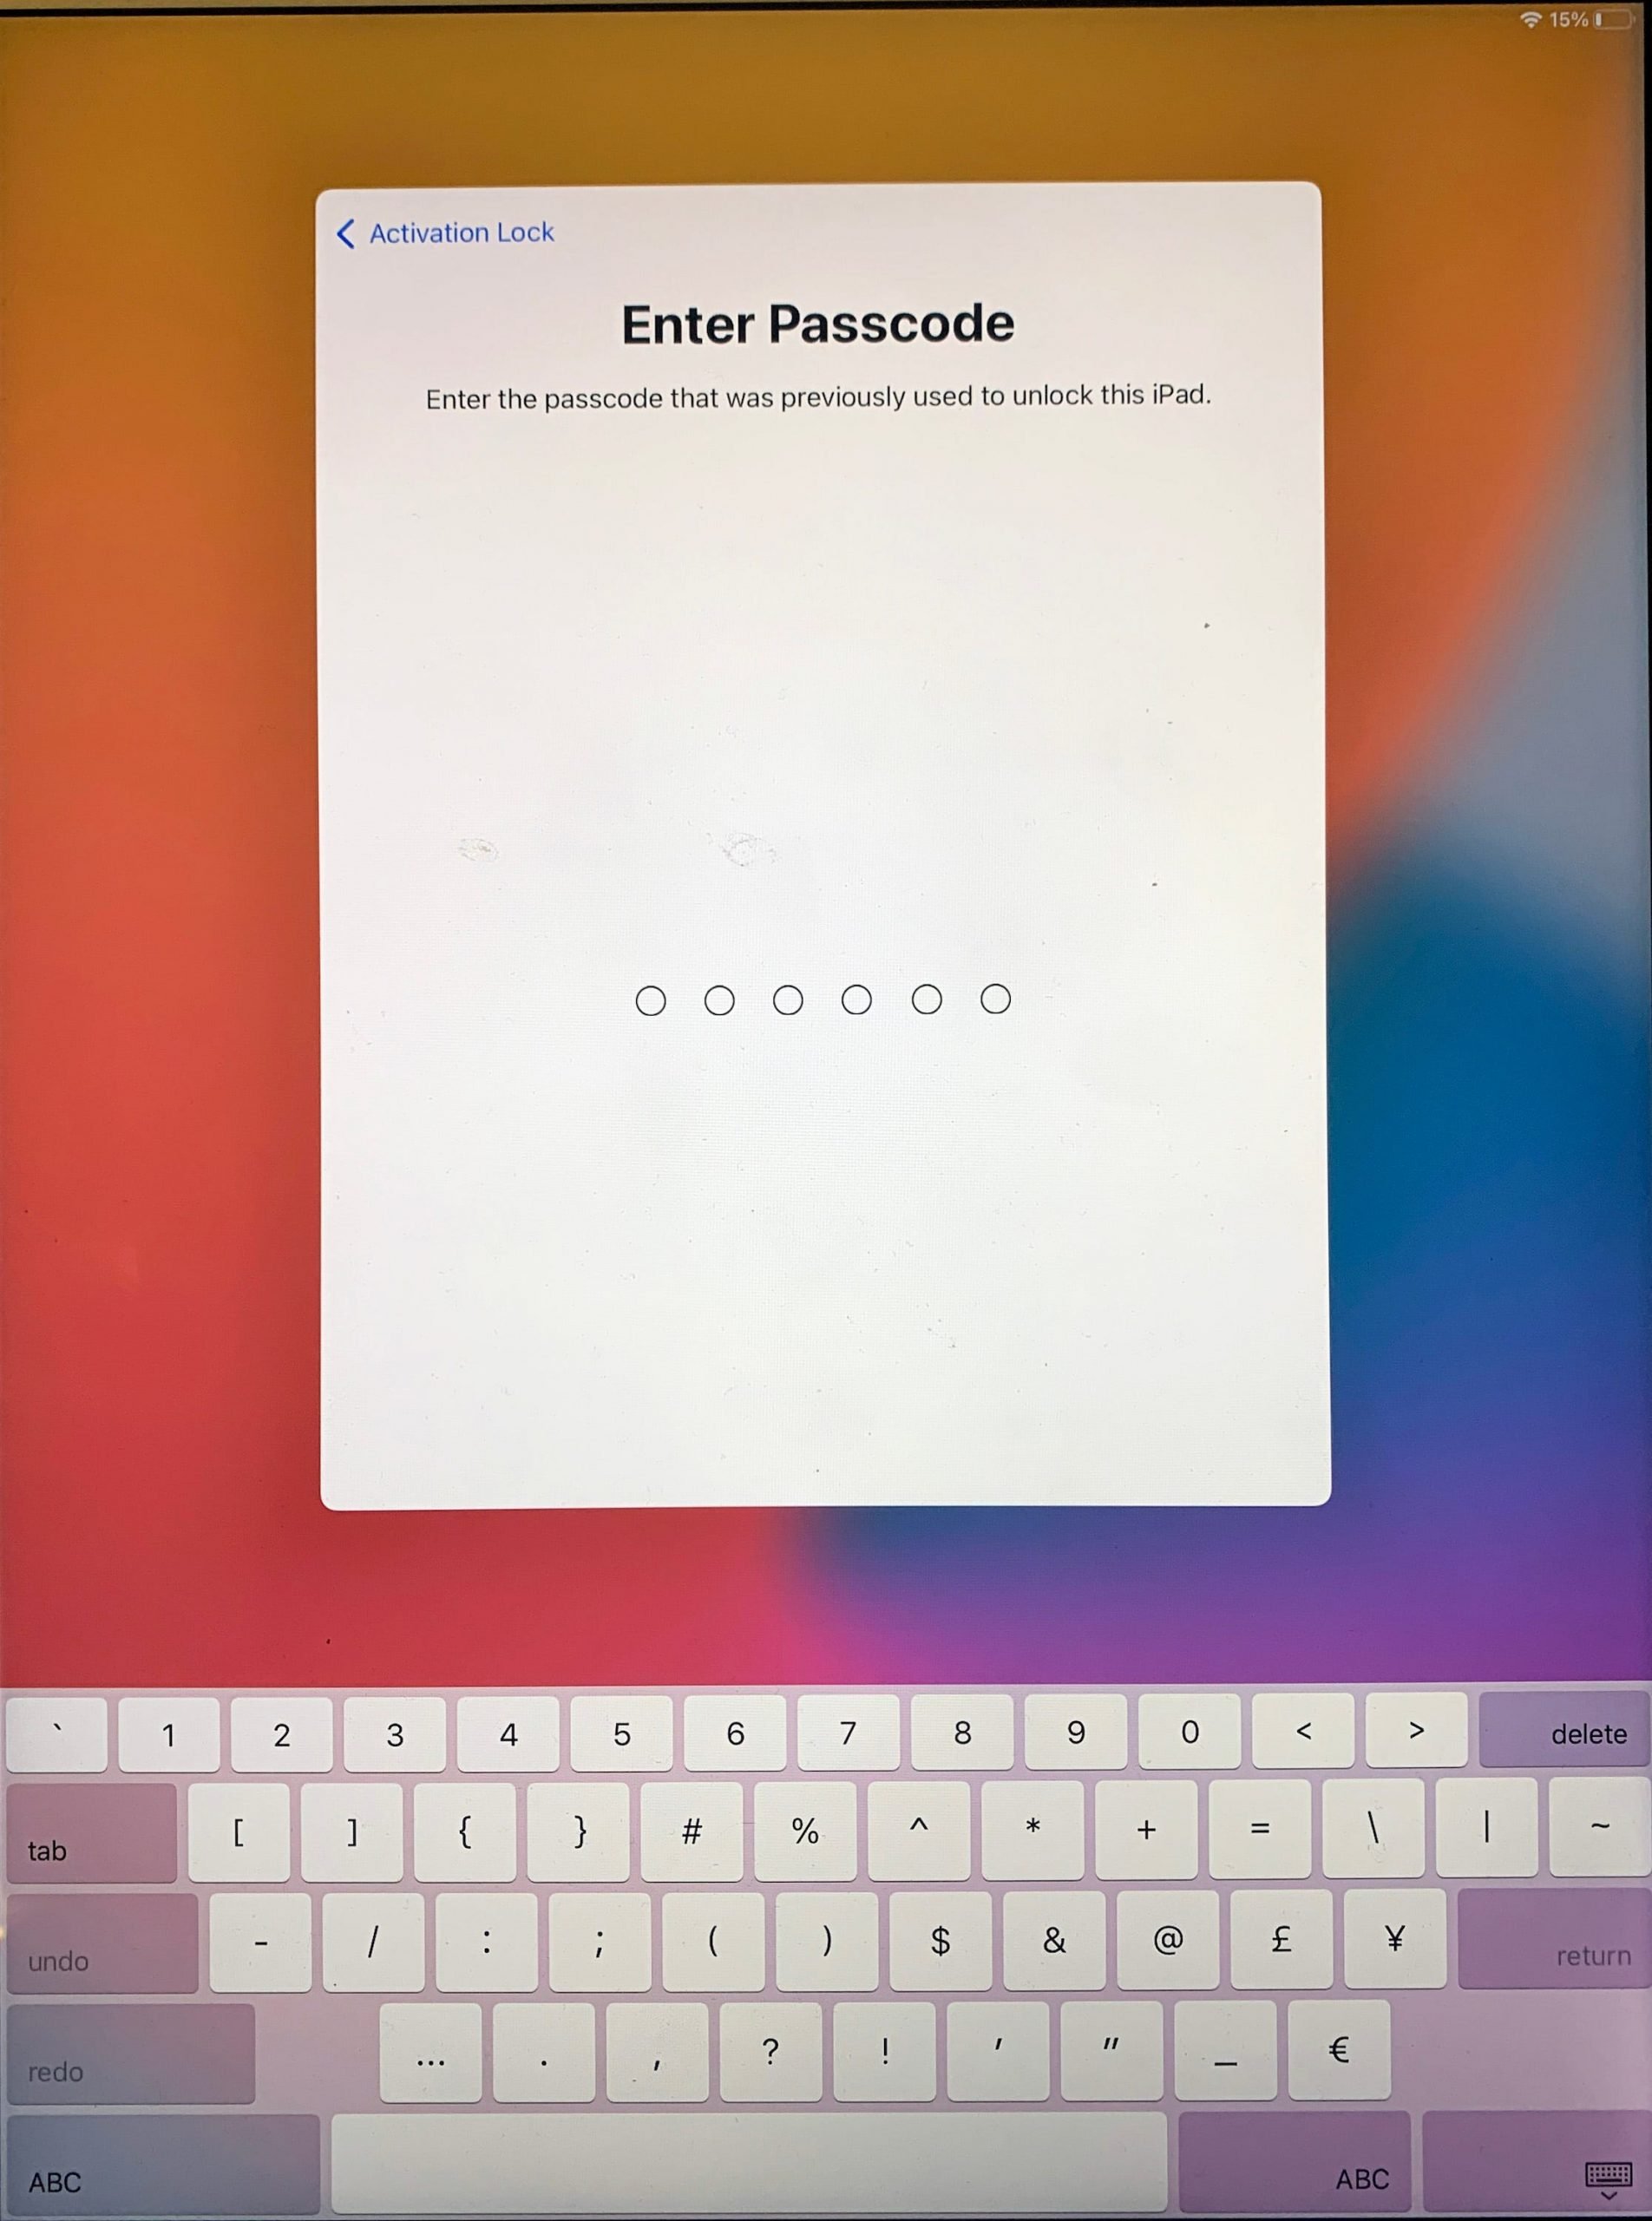 The Activation Lock screen on an iPad, asking the user to enter a passcode.